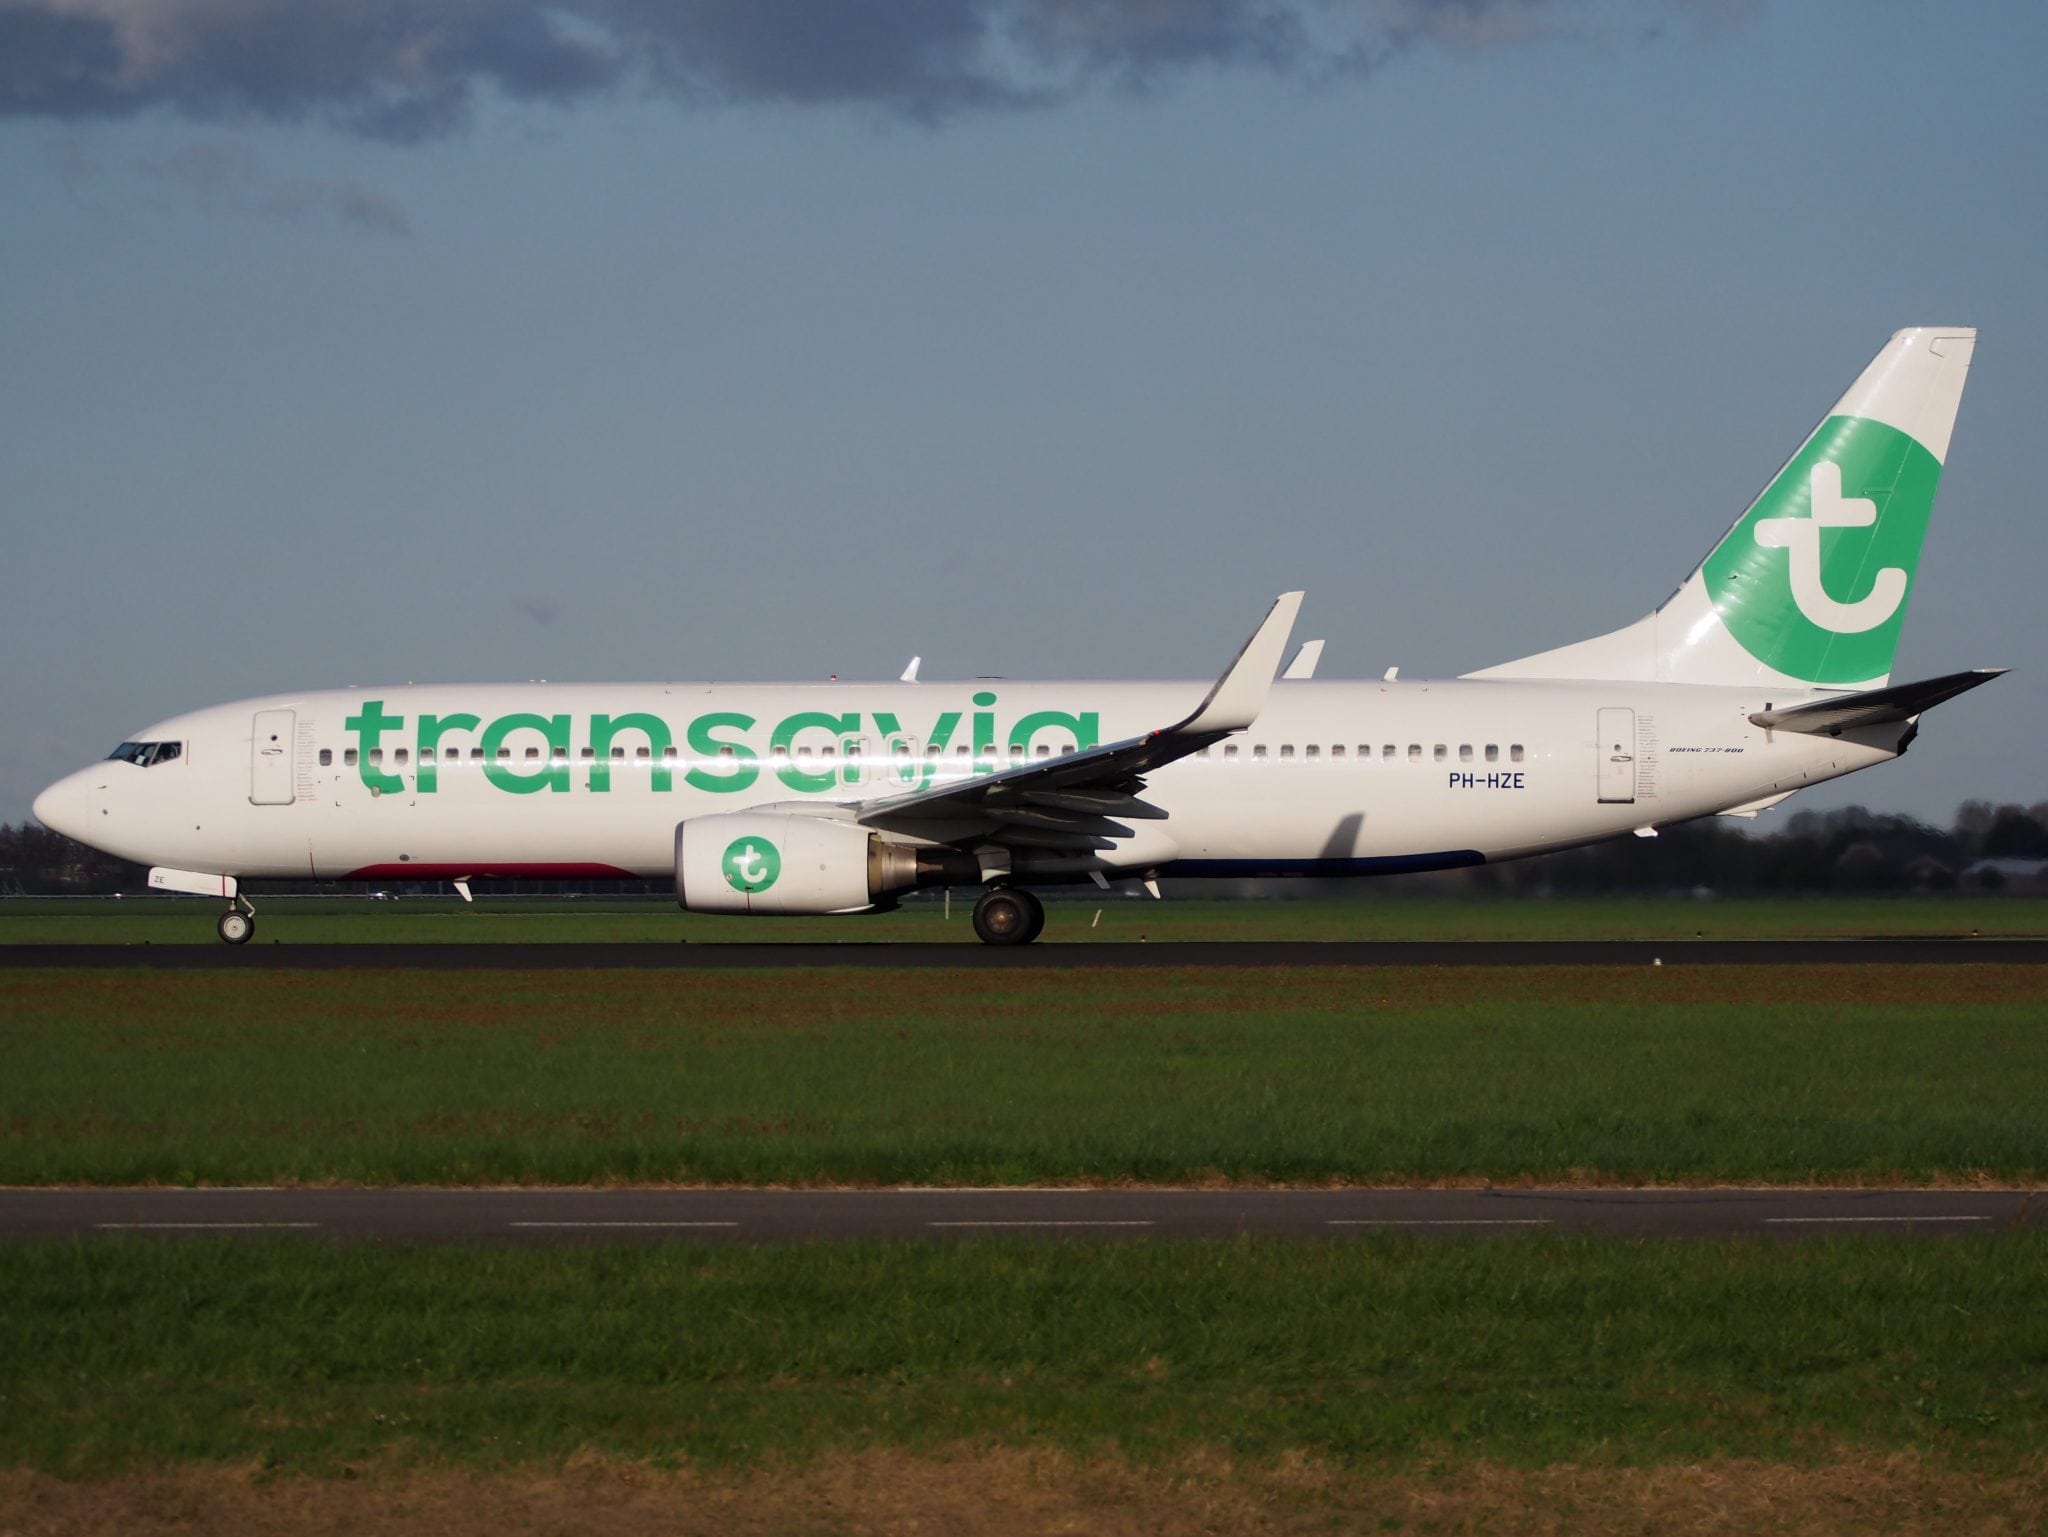 Air France-KLM will invest in its low cost airline, Transavia, while also creating a new, long-haul carrier.